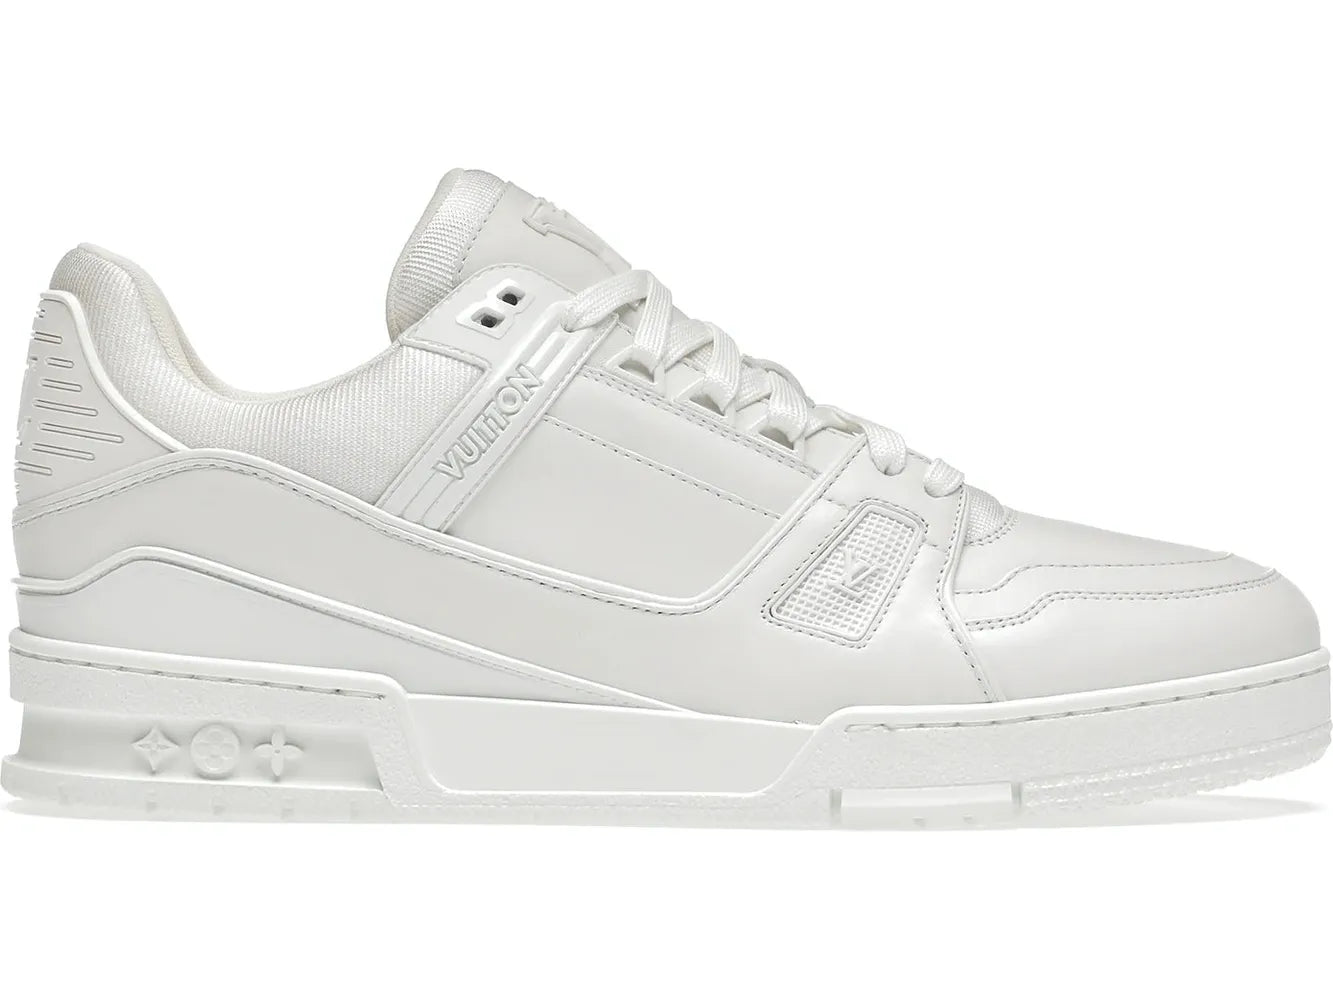 Louis Vuitton® LV Trainer Sneaker White. Size 39.0 in 2023